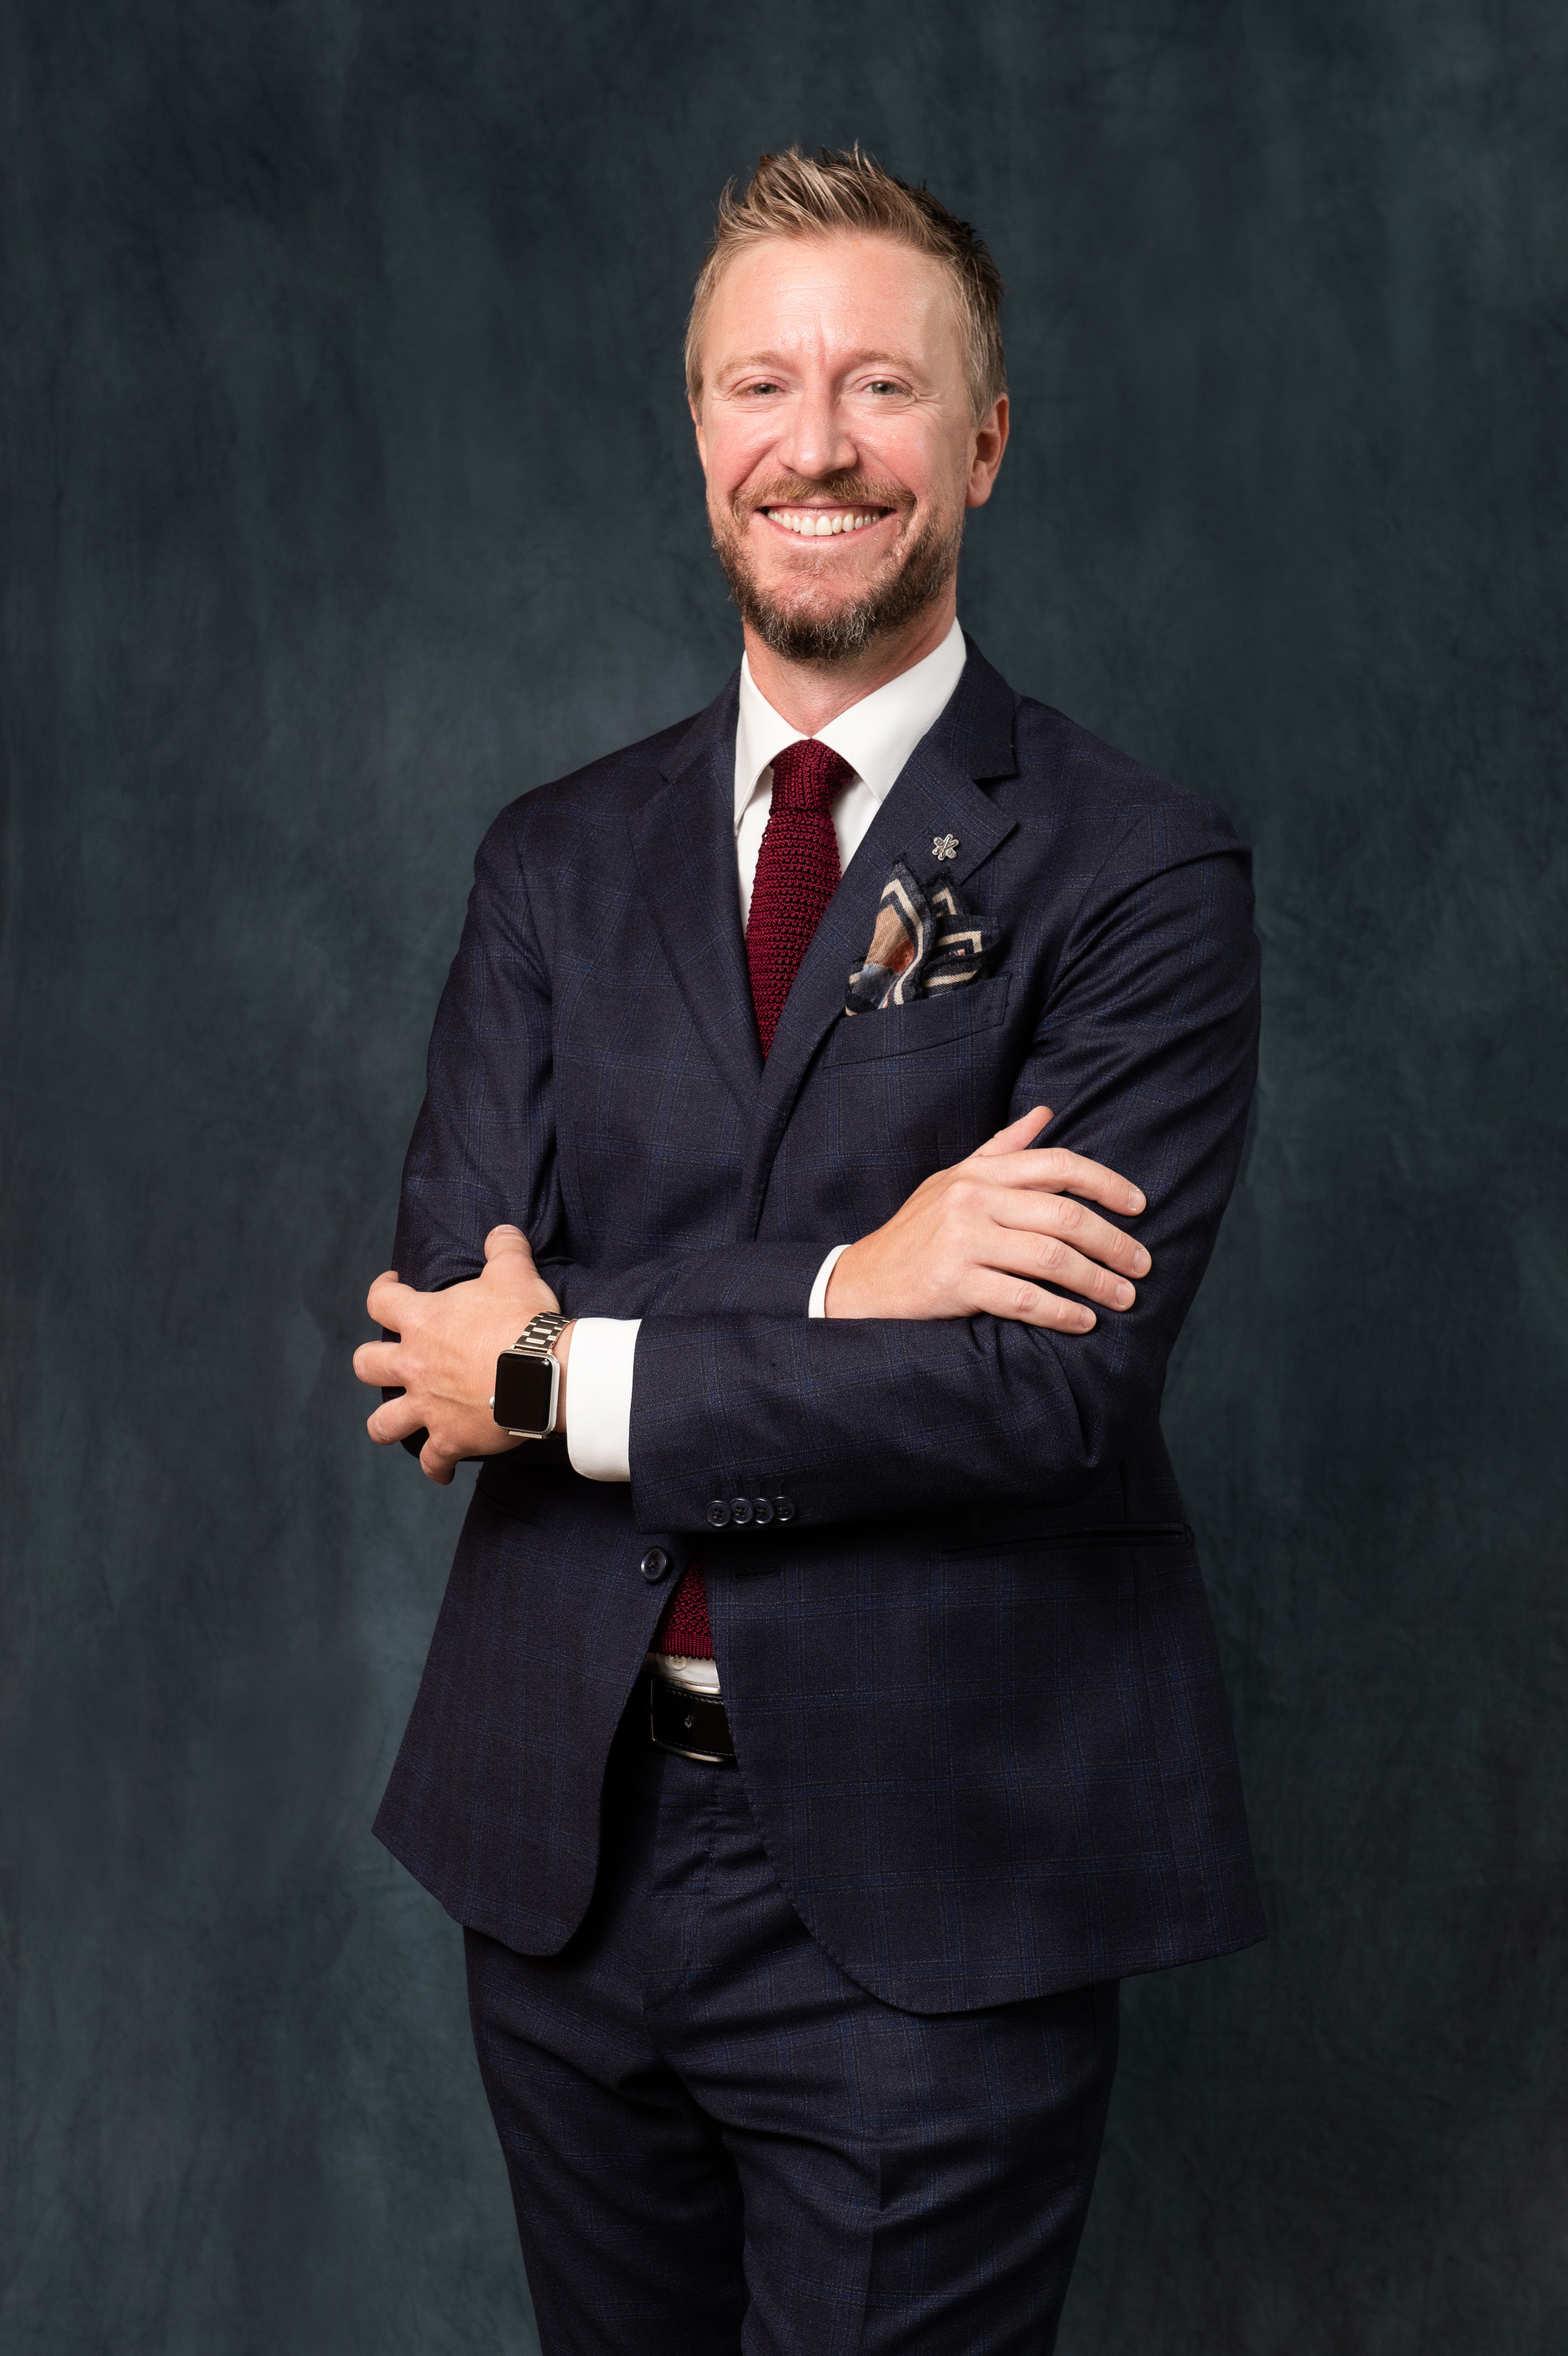 Alessandro Rossi, National Category Manager Wine di Partesa